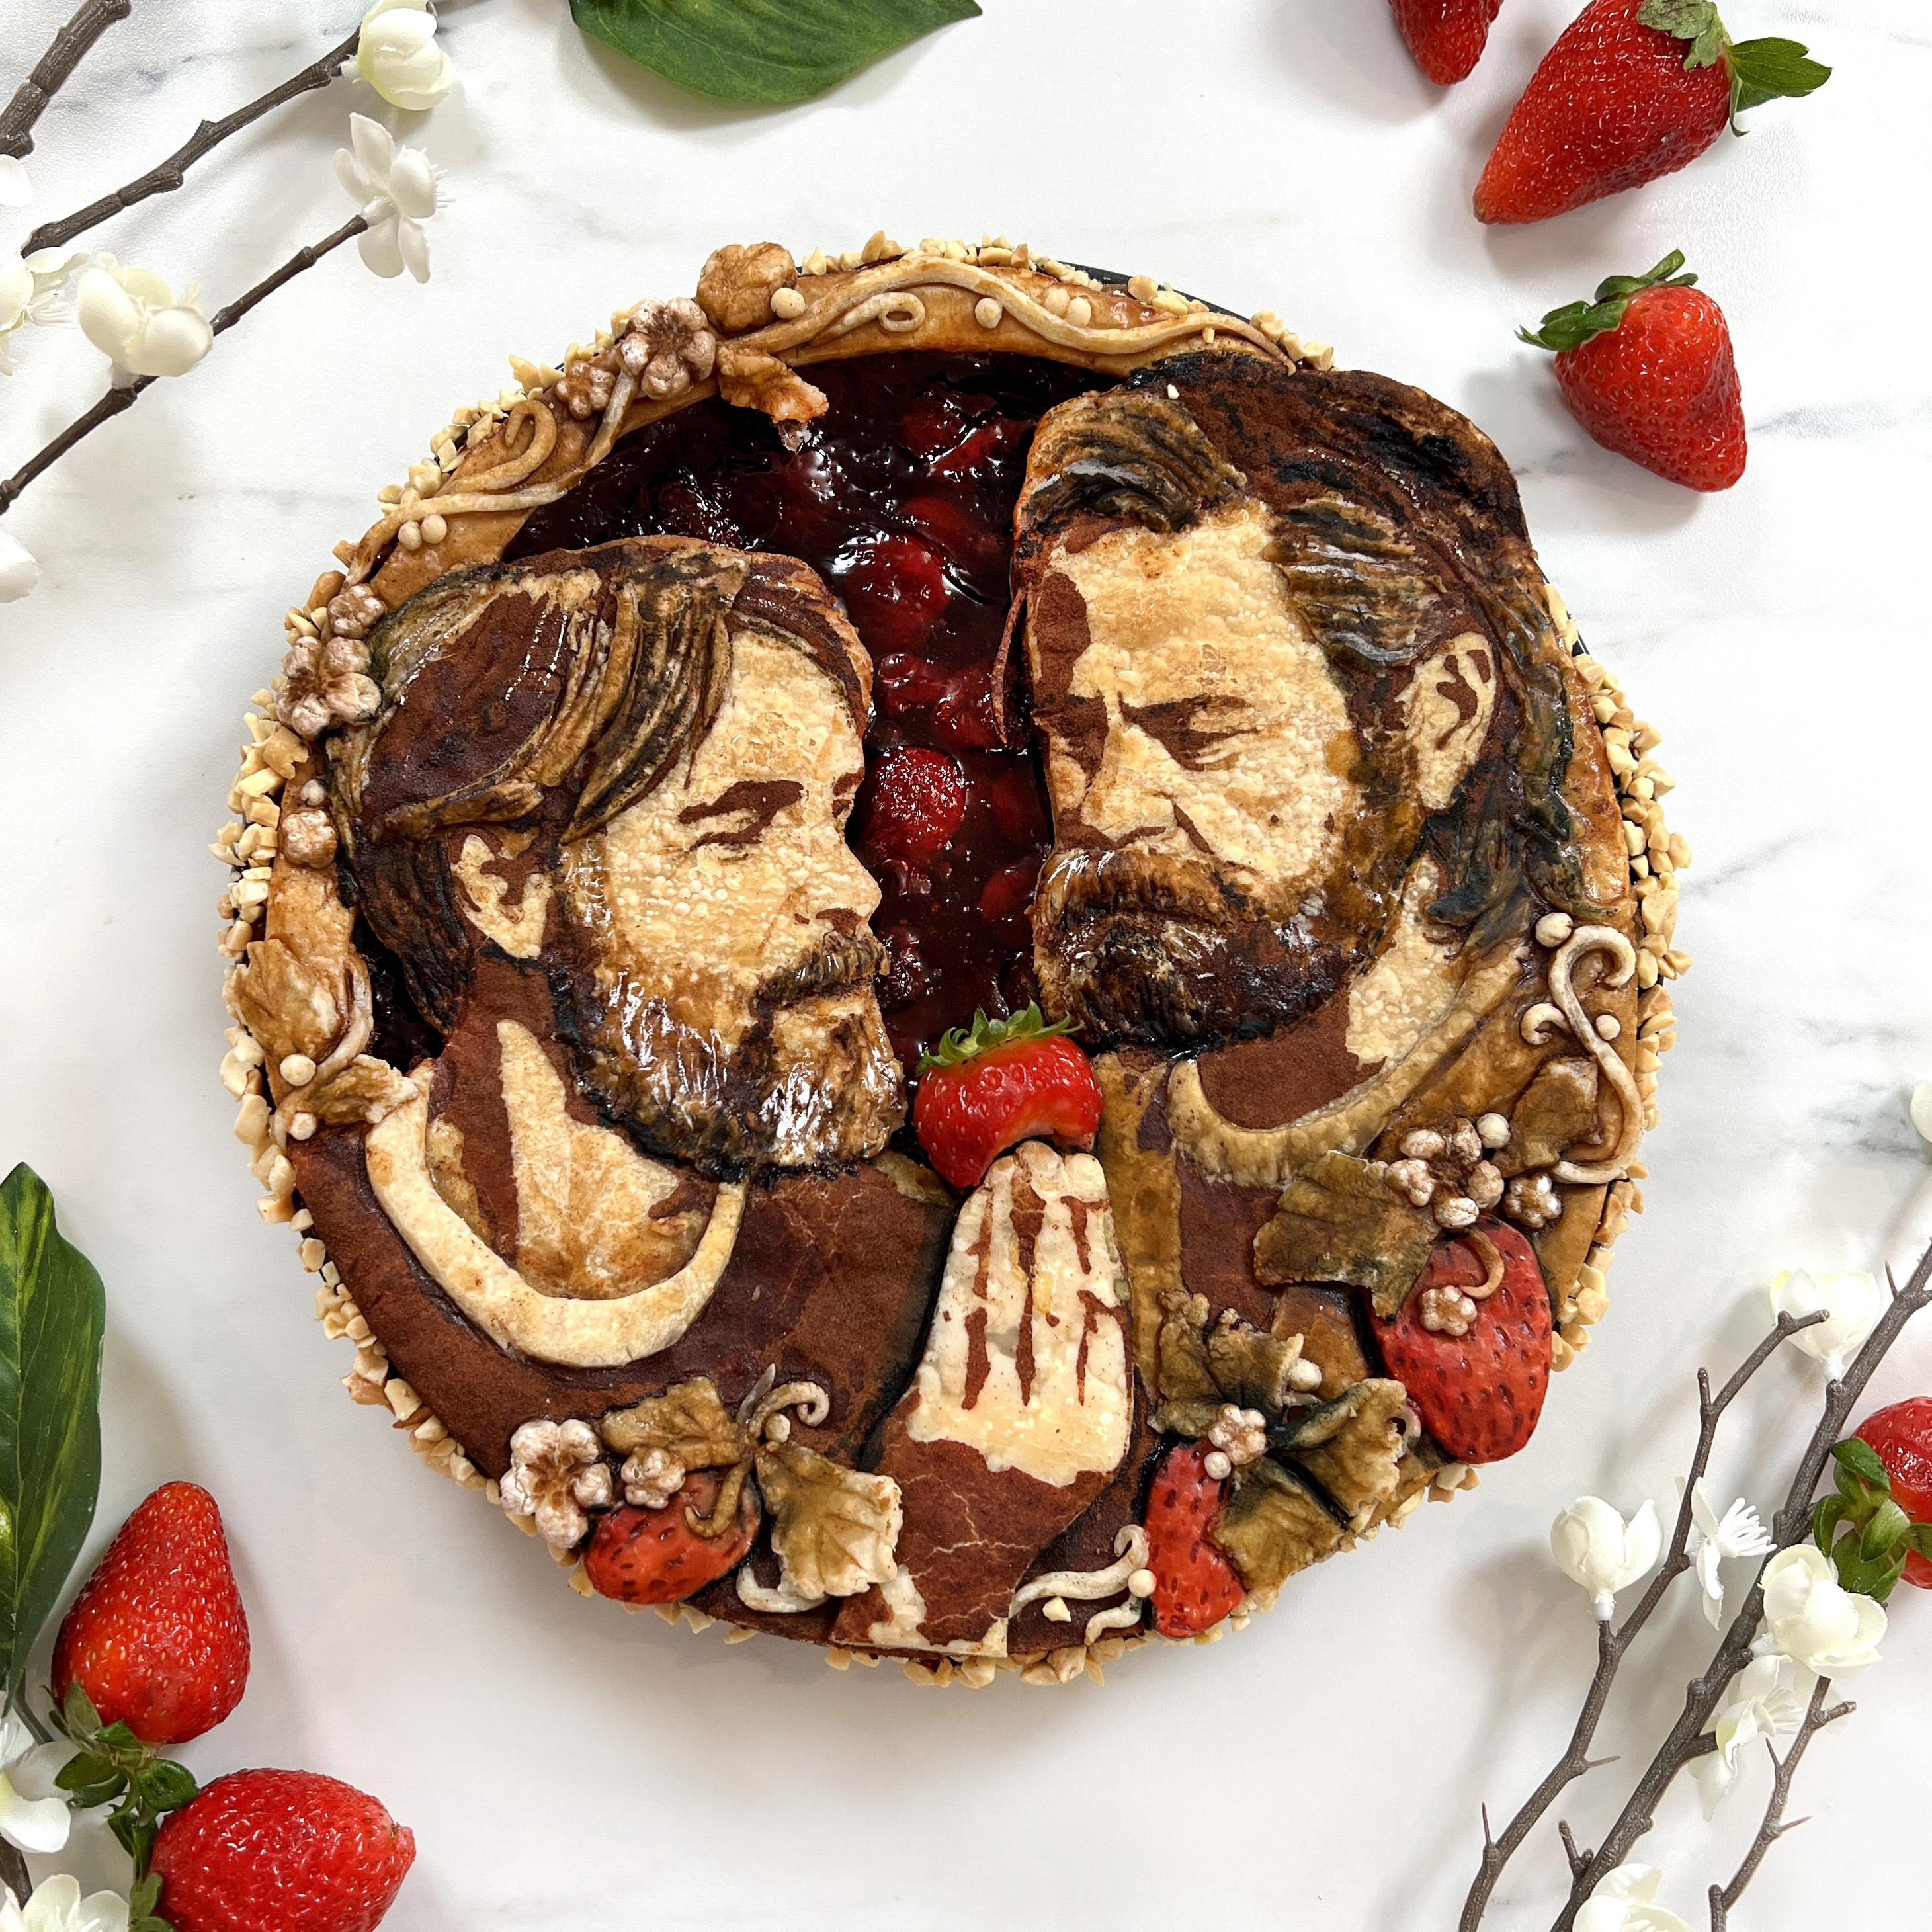 "The Last of Us" themed pie featuring the faces of Bill and Frank, strawberry filling, and short crust pie pastry